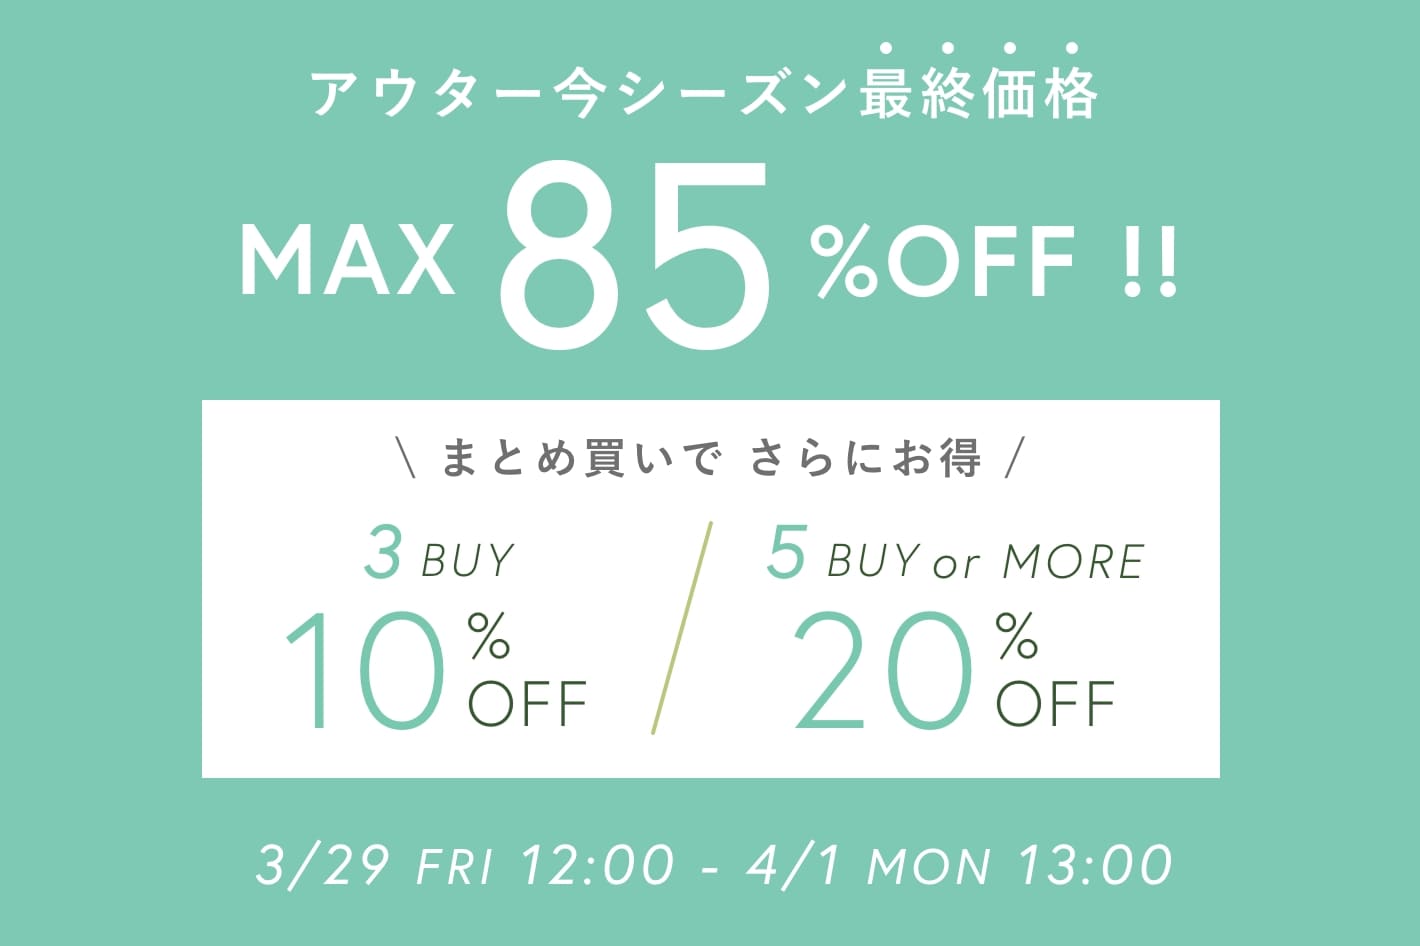 OUTLET 【PAL GROUP OUTLET限定】<br>3BUY10%OFF・5BUYmore...20%OFFクーポンSALE開催！